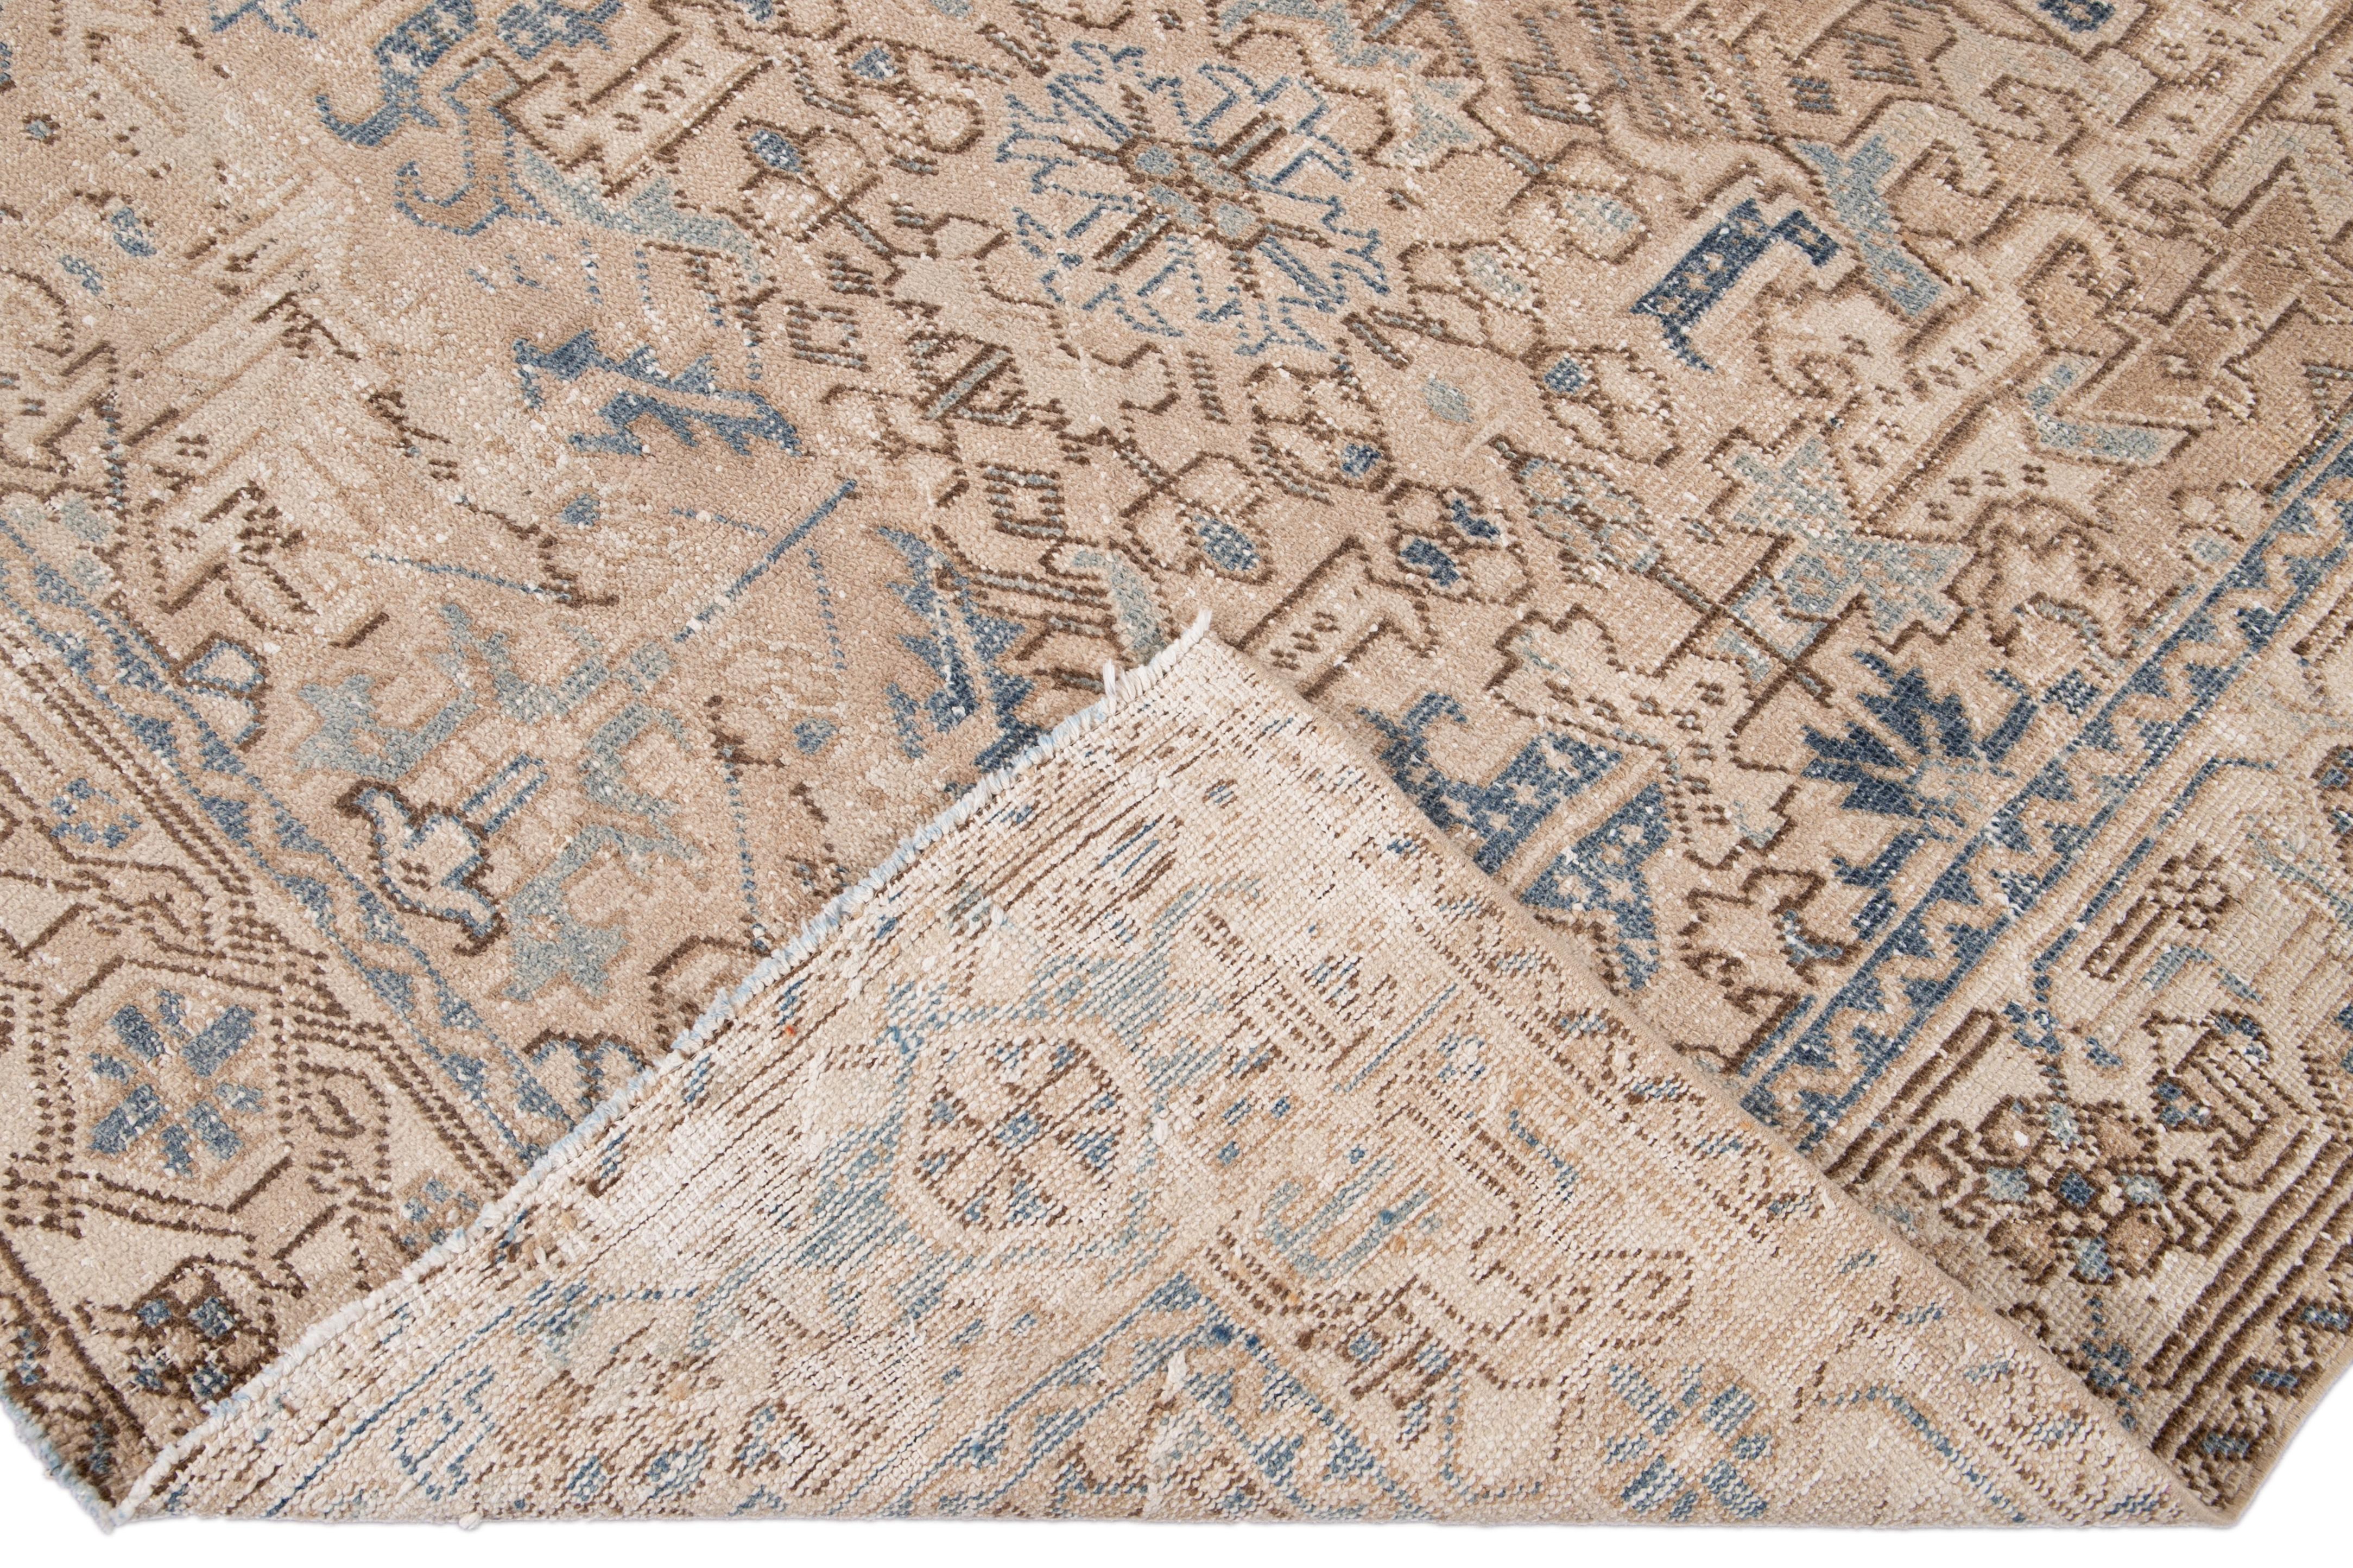 Beautiful antique Persian Heriz hand knotted wool rug with a beige field. This Heriz rug has a blue and brown frame and accents in an all-over gorgeous geometric floral shabby chic design.

This rug measures: 6' x 8'2